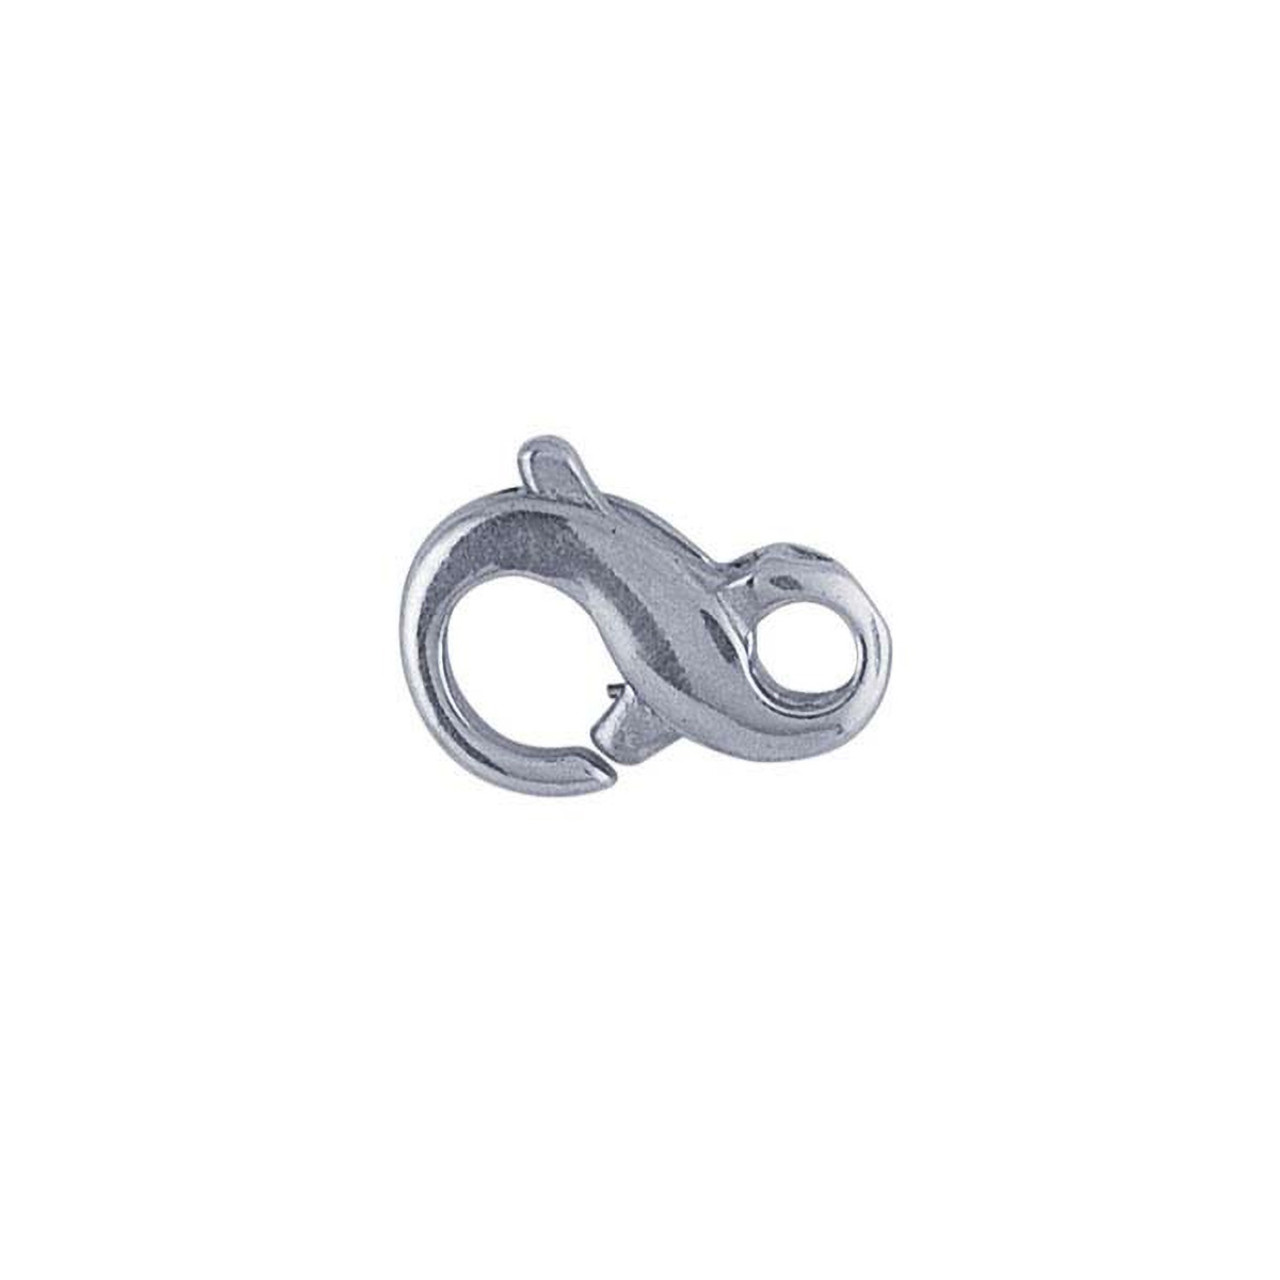 Tabbed Lobster Claw Clasps